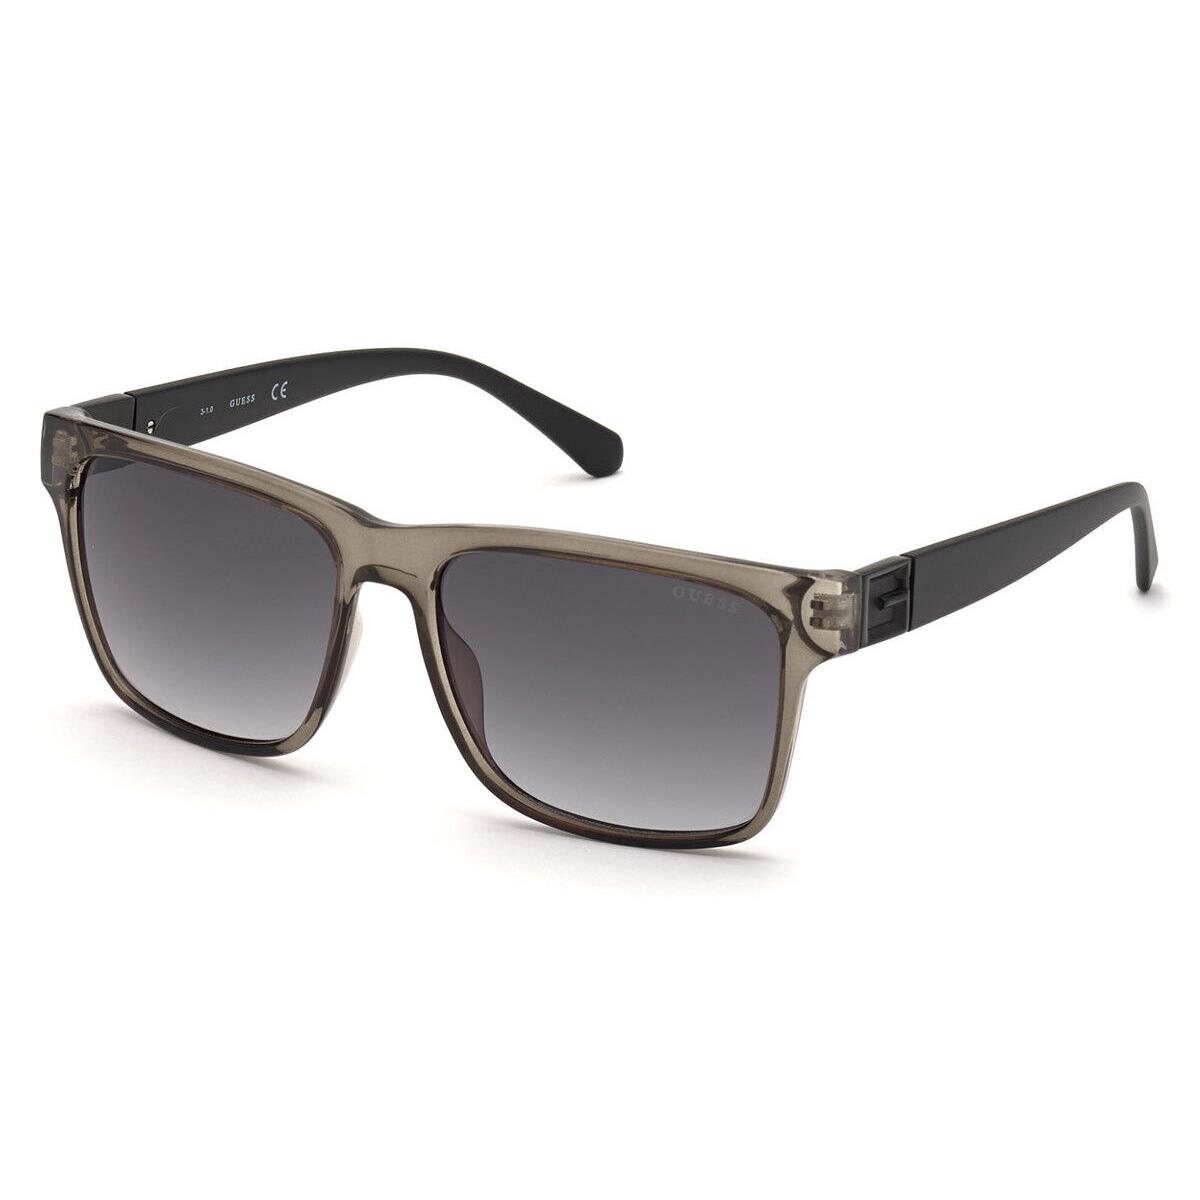 Guess GU00004 Sunglasses Men Gray Other Square 58mm